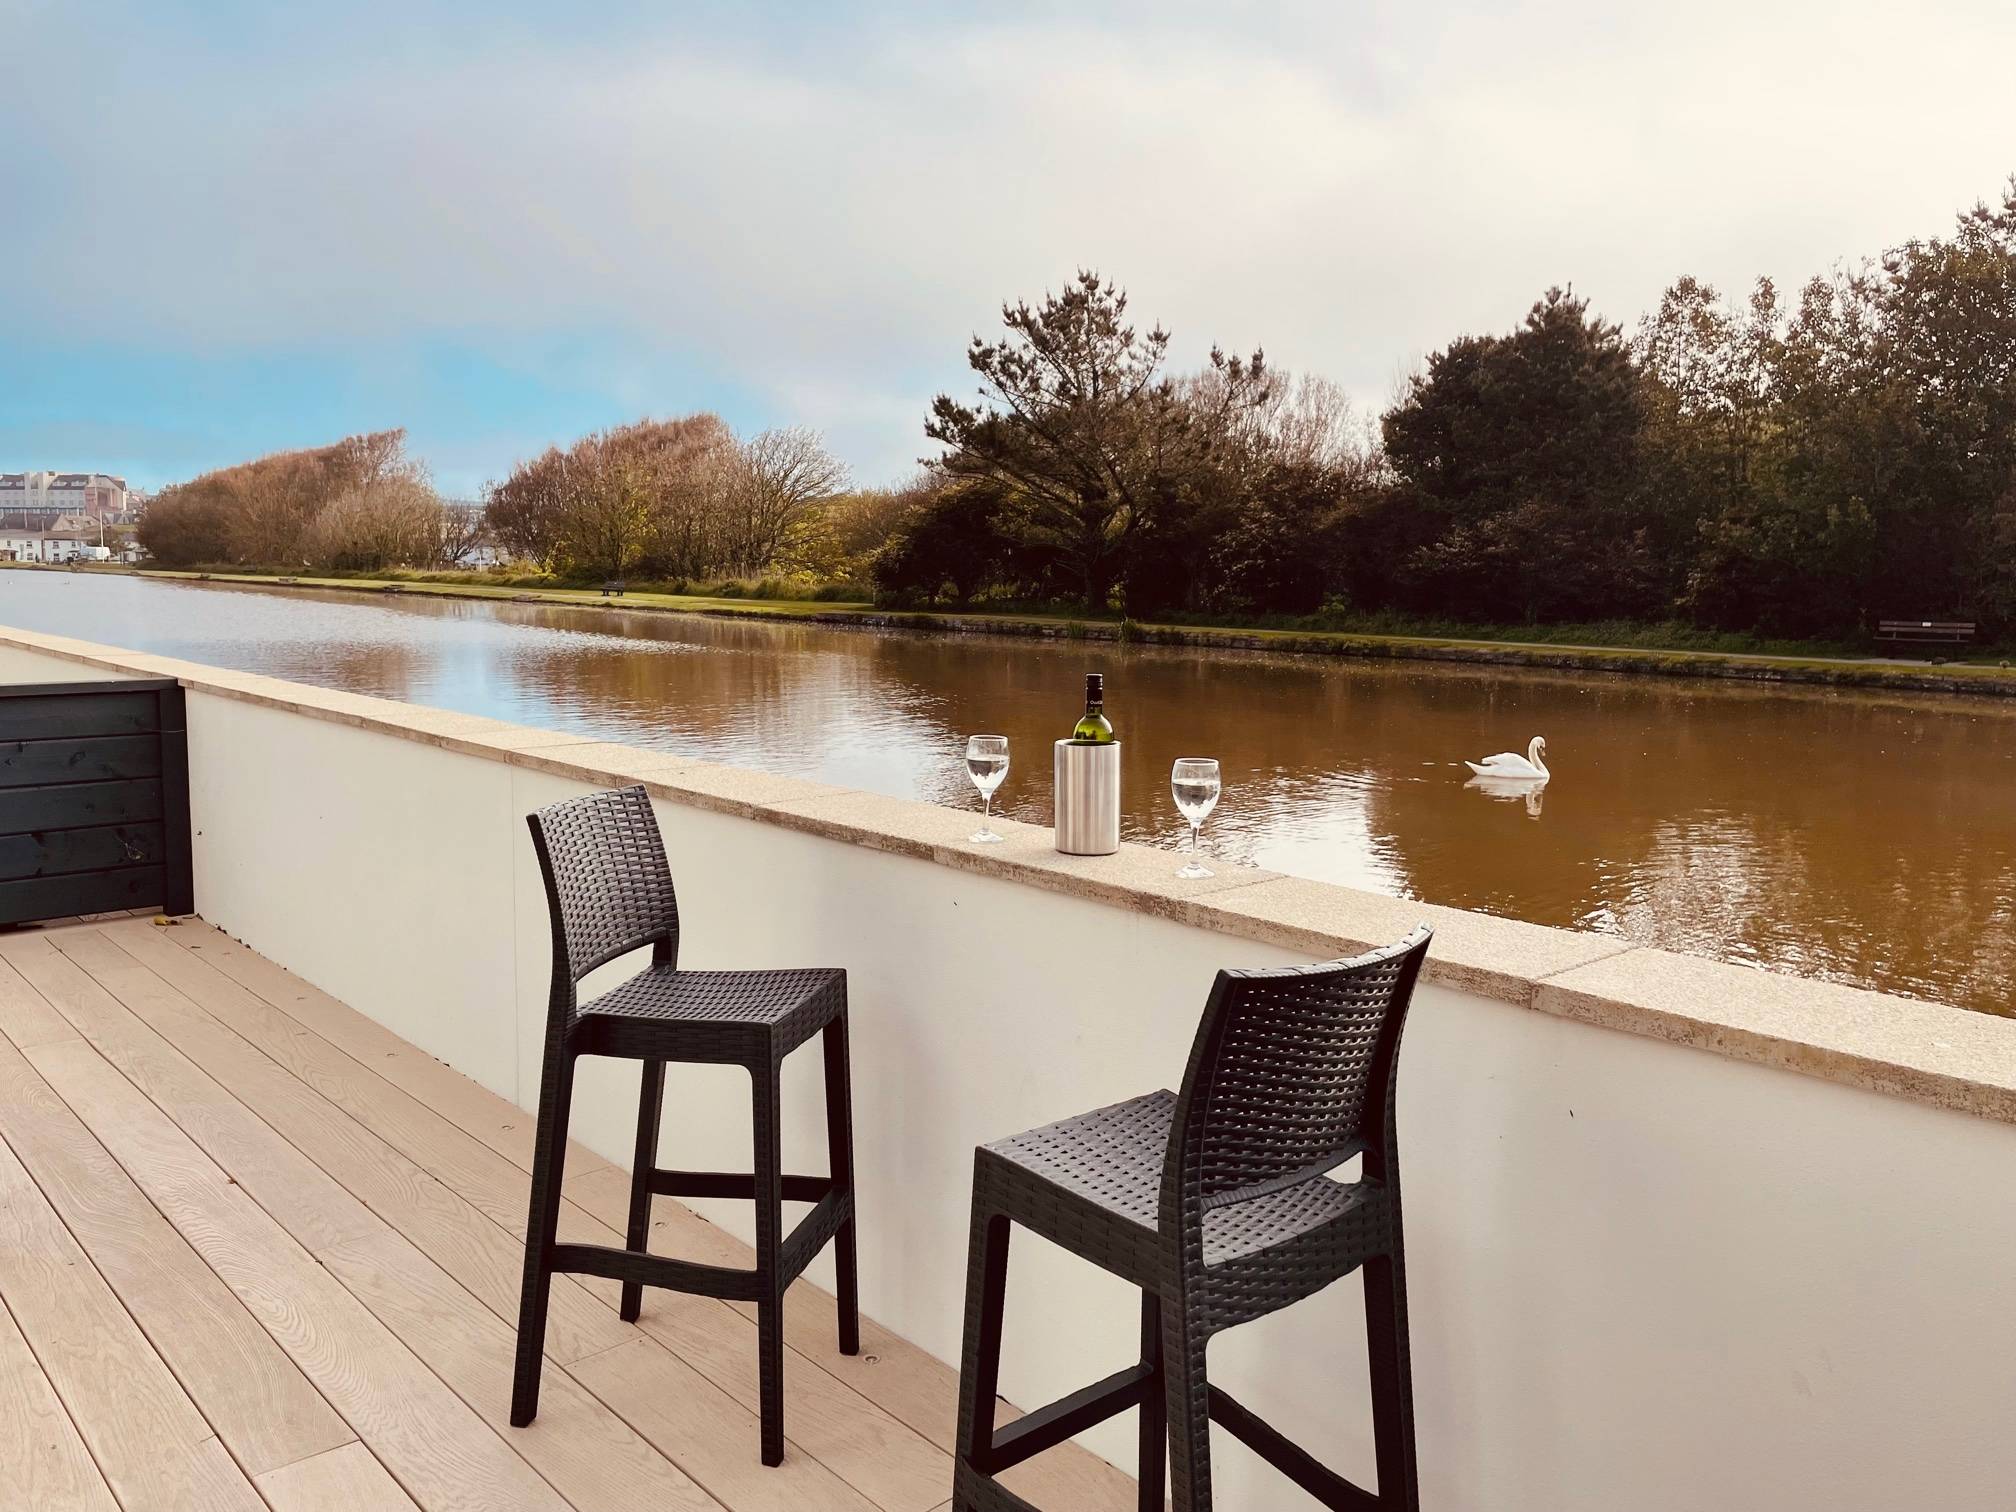 Image of 2 high chairs with drinks on wall, overlooking Bude canal